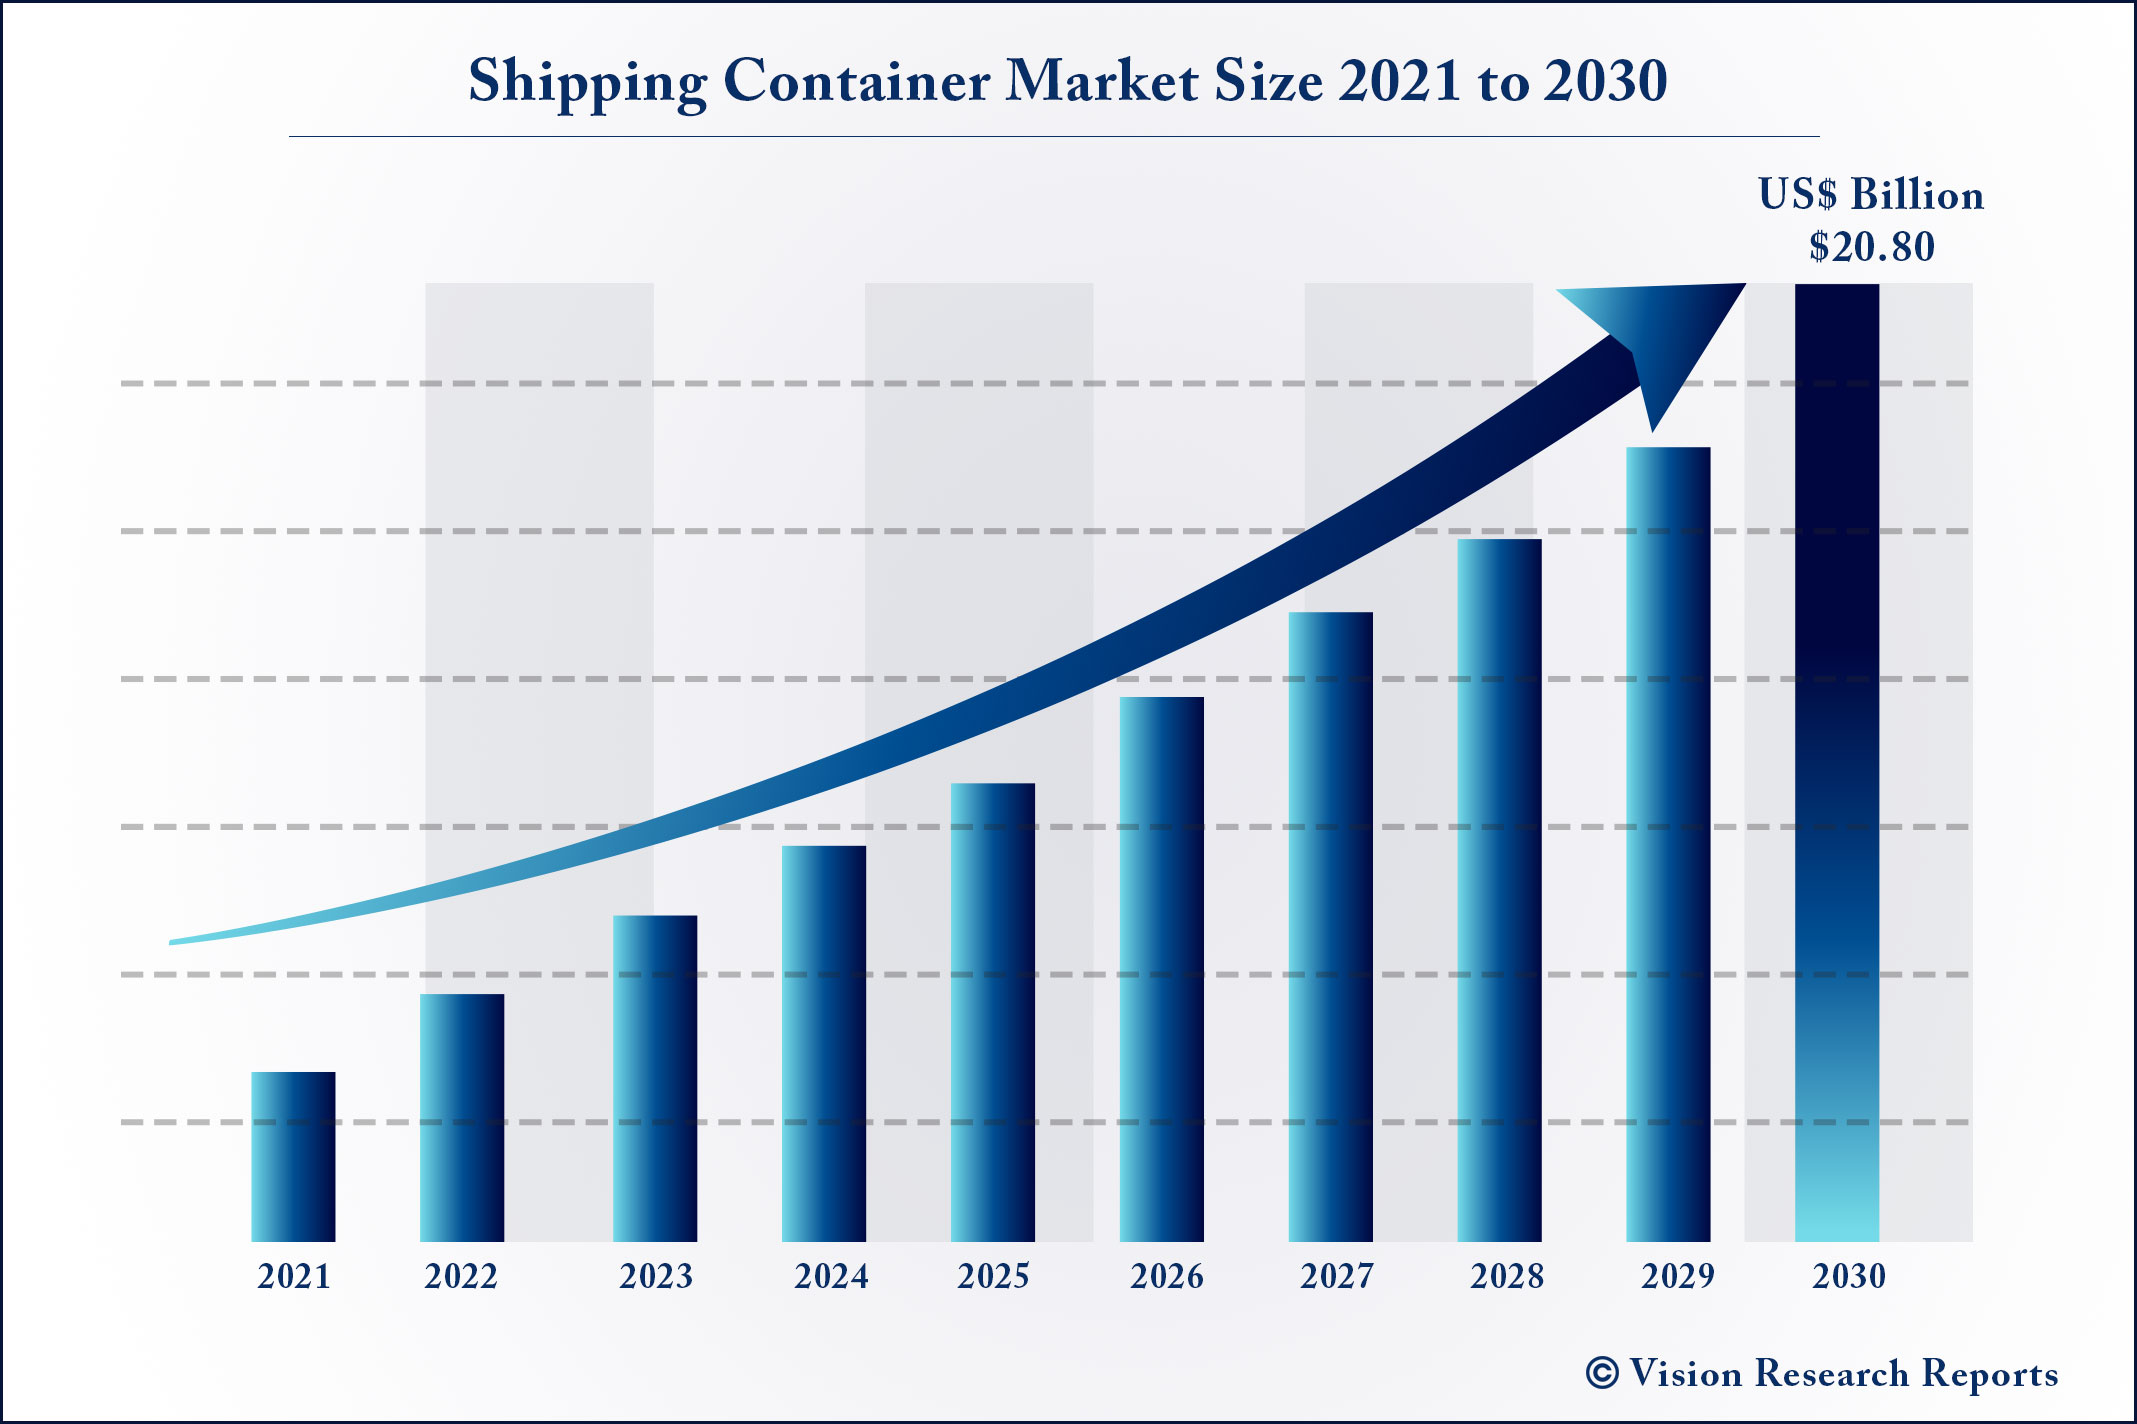 Shipping Container Market Size 2021 to 2030